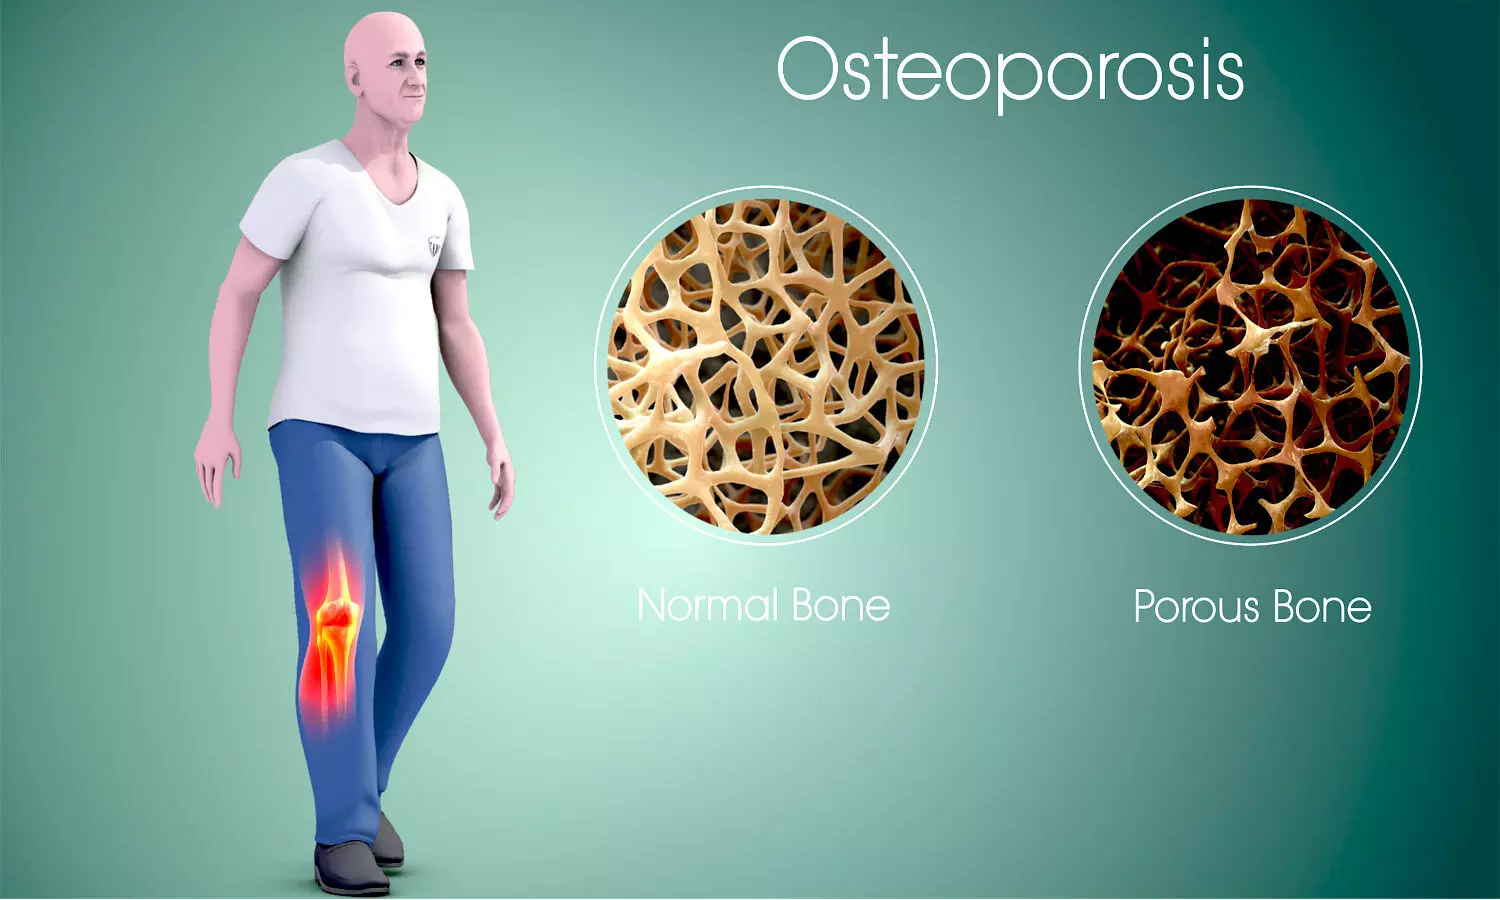 Laser irradiation may be promising treatment modality for osteoporosis